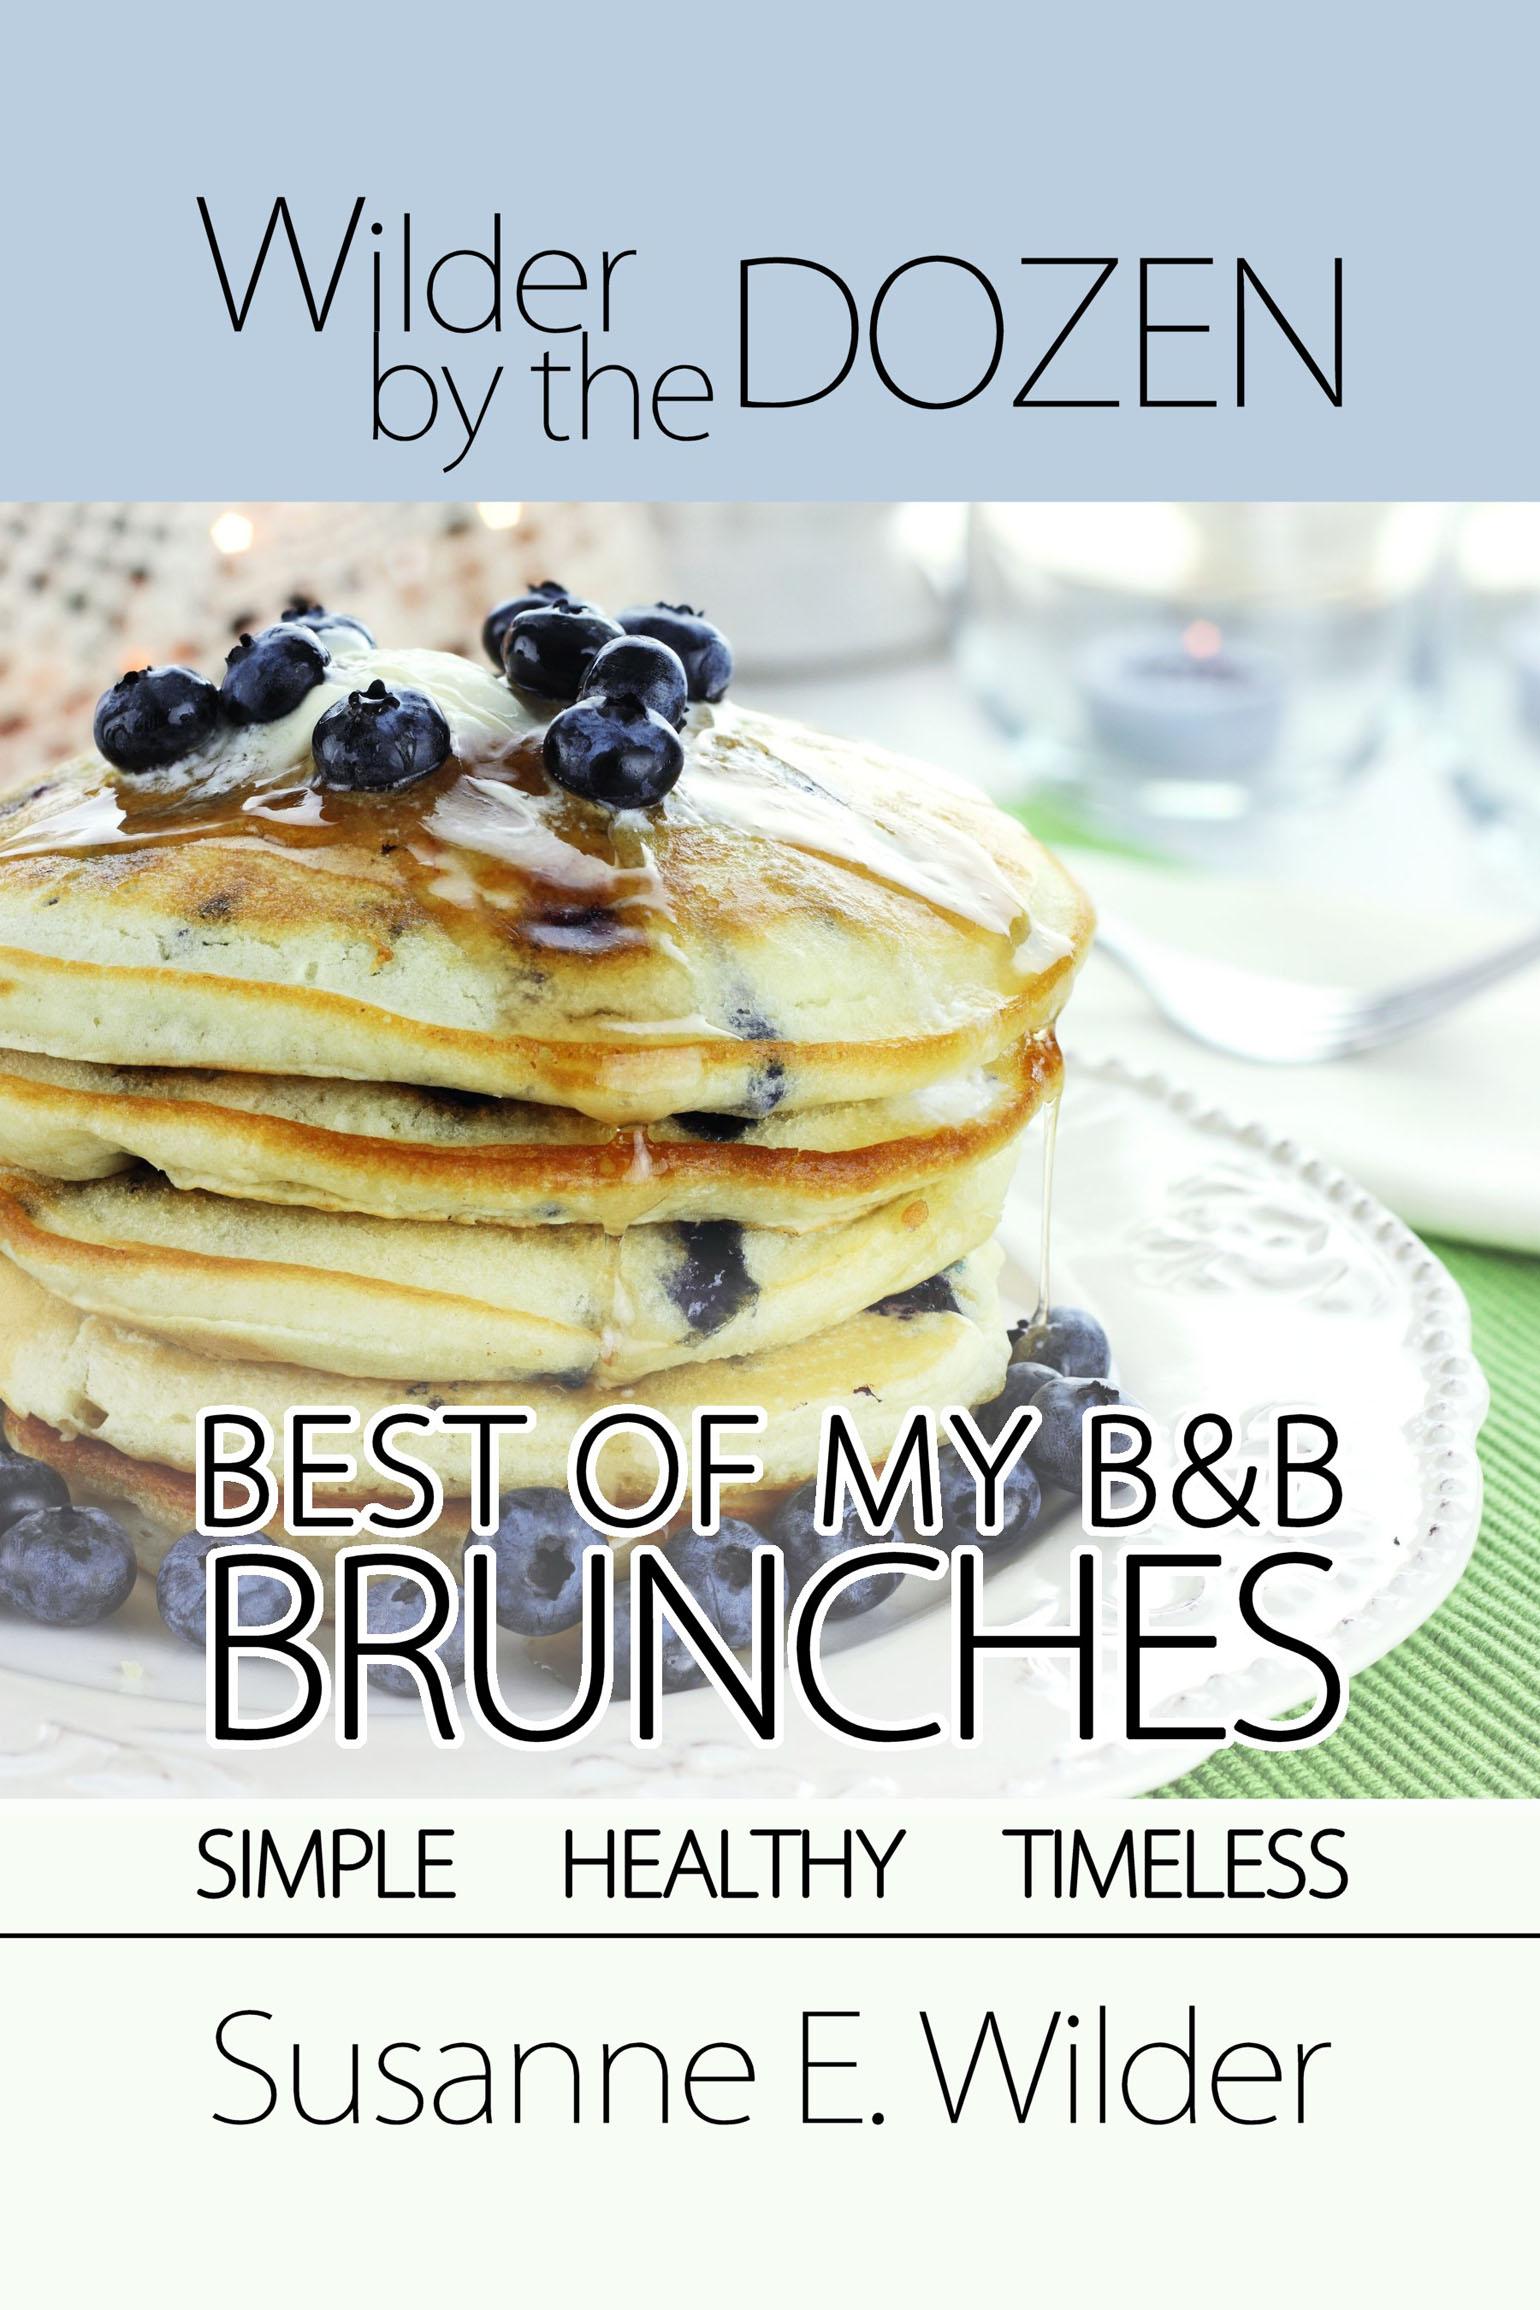 Best of My B&B Brunches